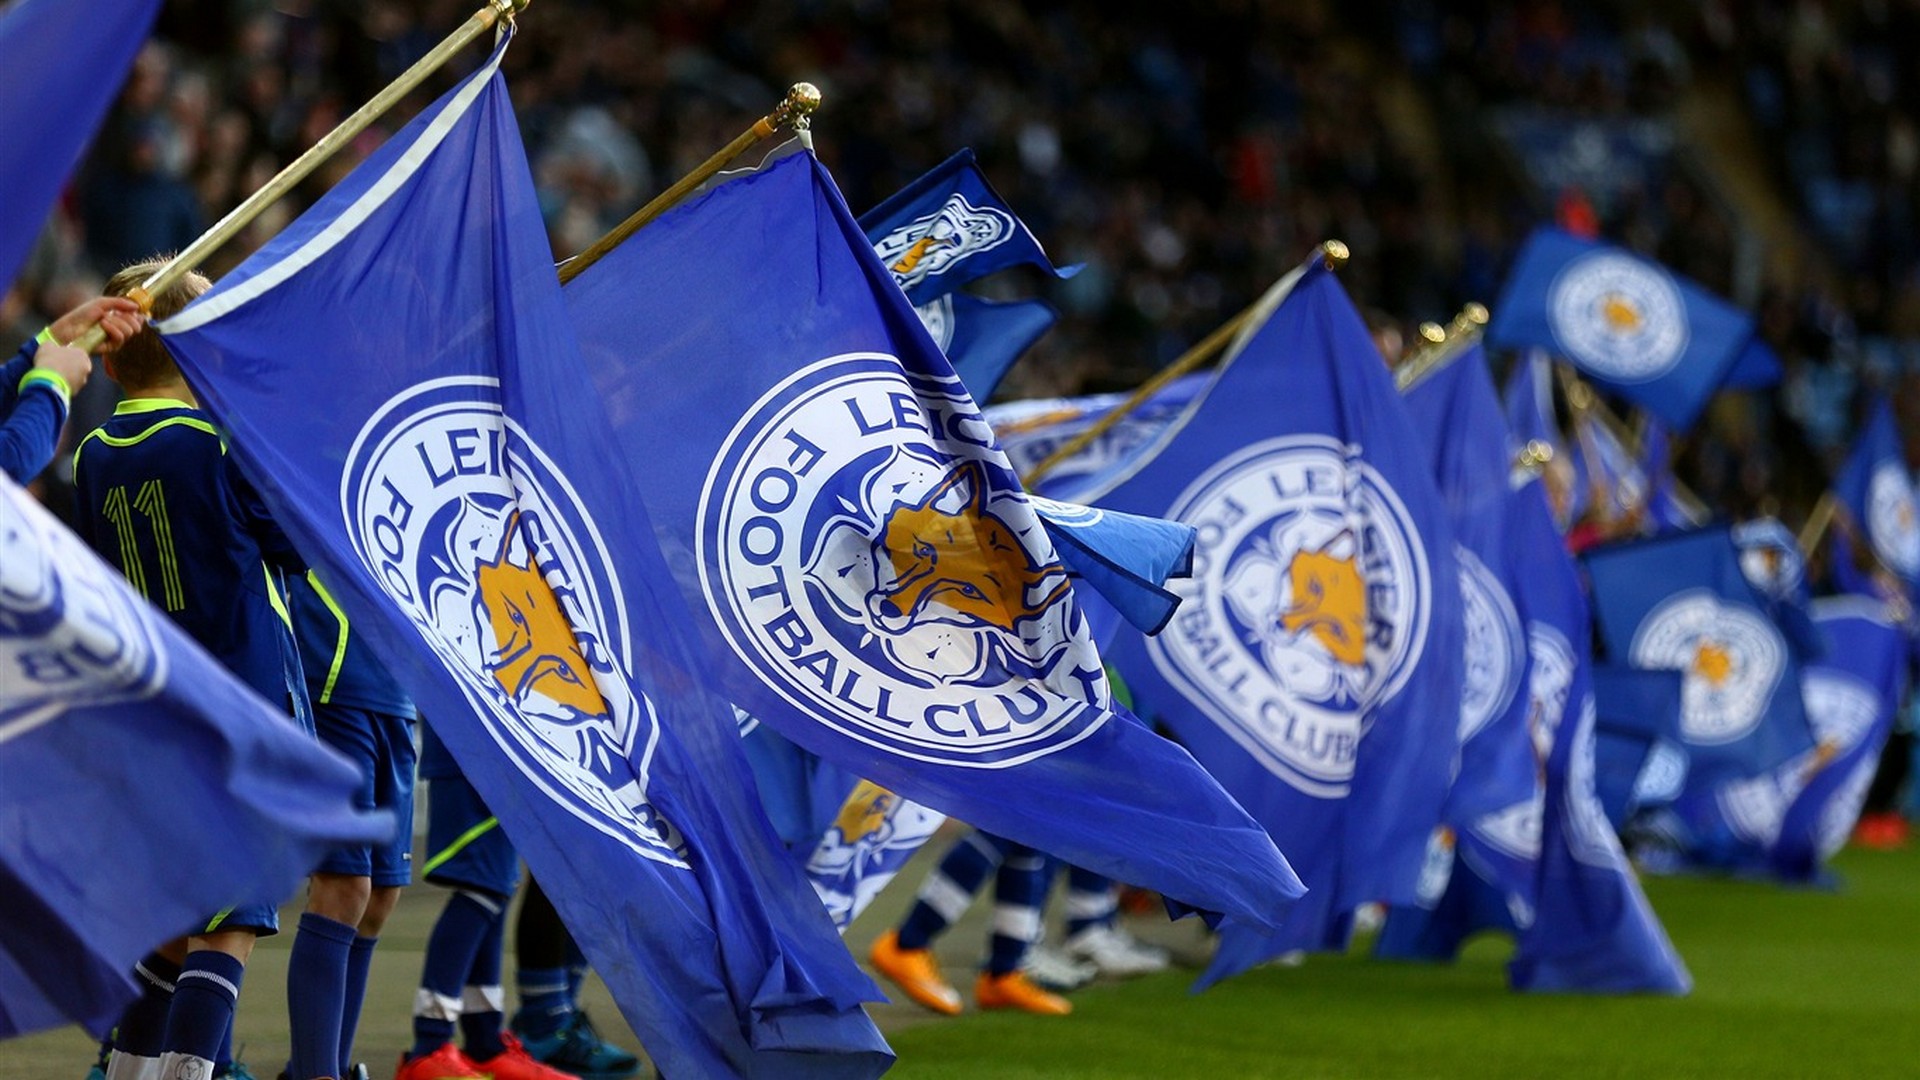 Leicester City For Mac Wallpaper With high-resolution 1920X1080 pixel. You can use this wallpaper for your Desktop Computers, Mac Screensavers, Windows Backgrounds, iPhone Wallpapers, Tablet or Android Lock screen and another Mobile device